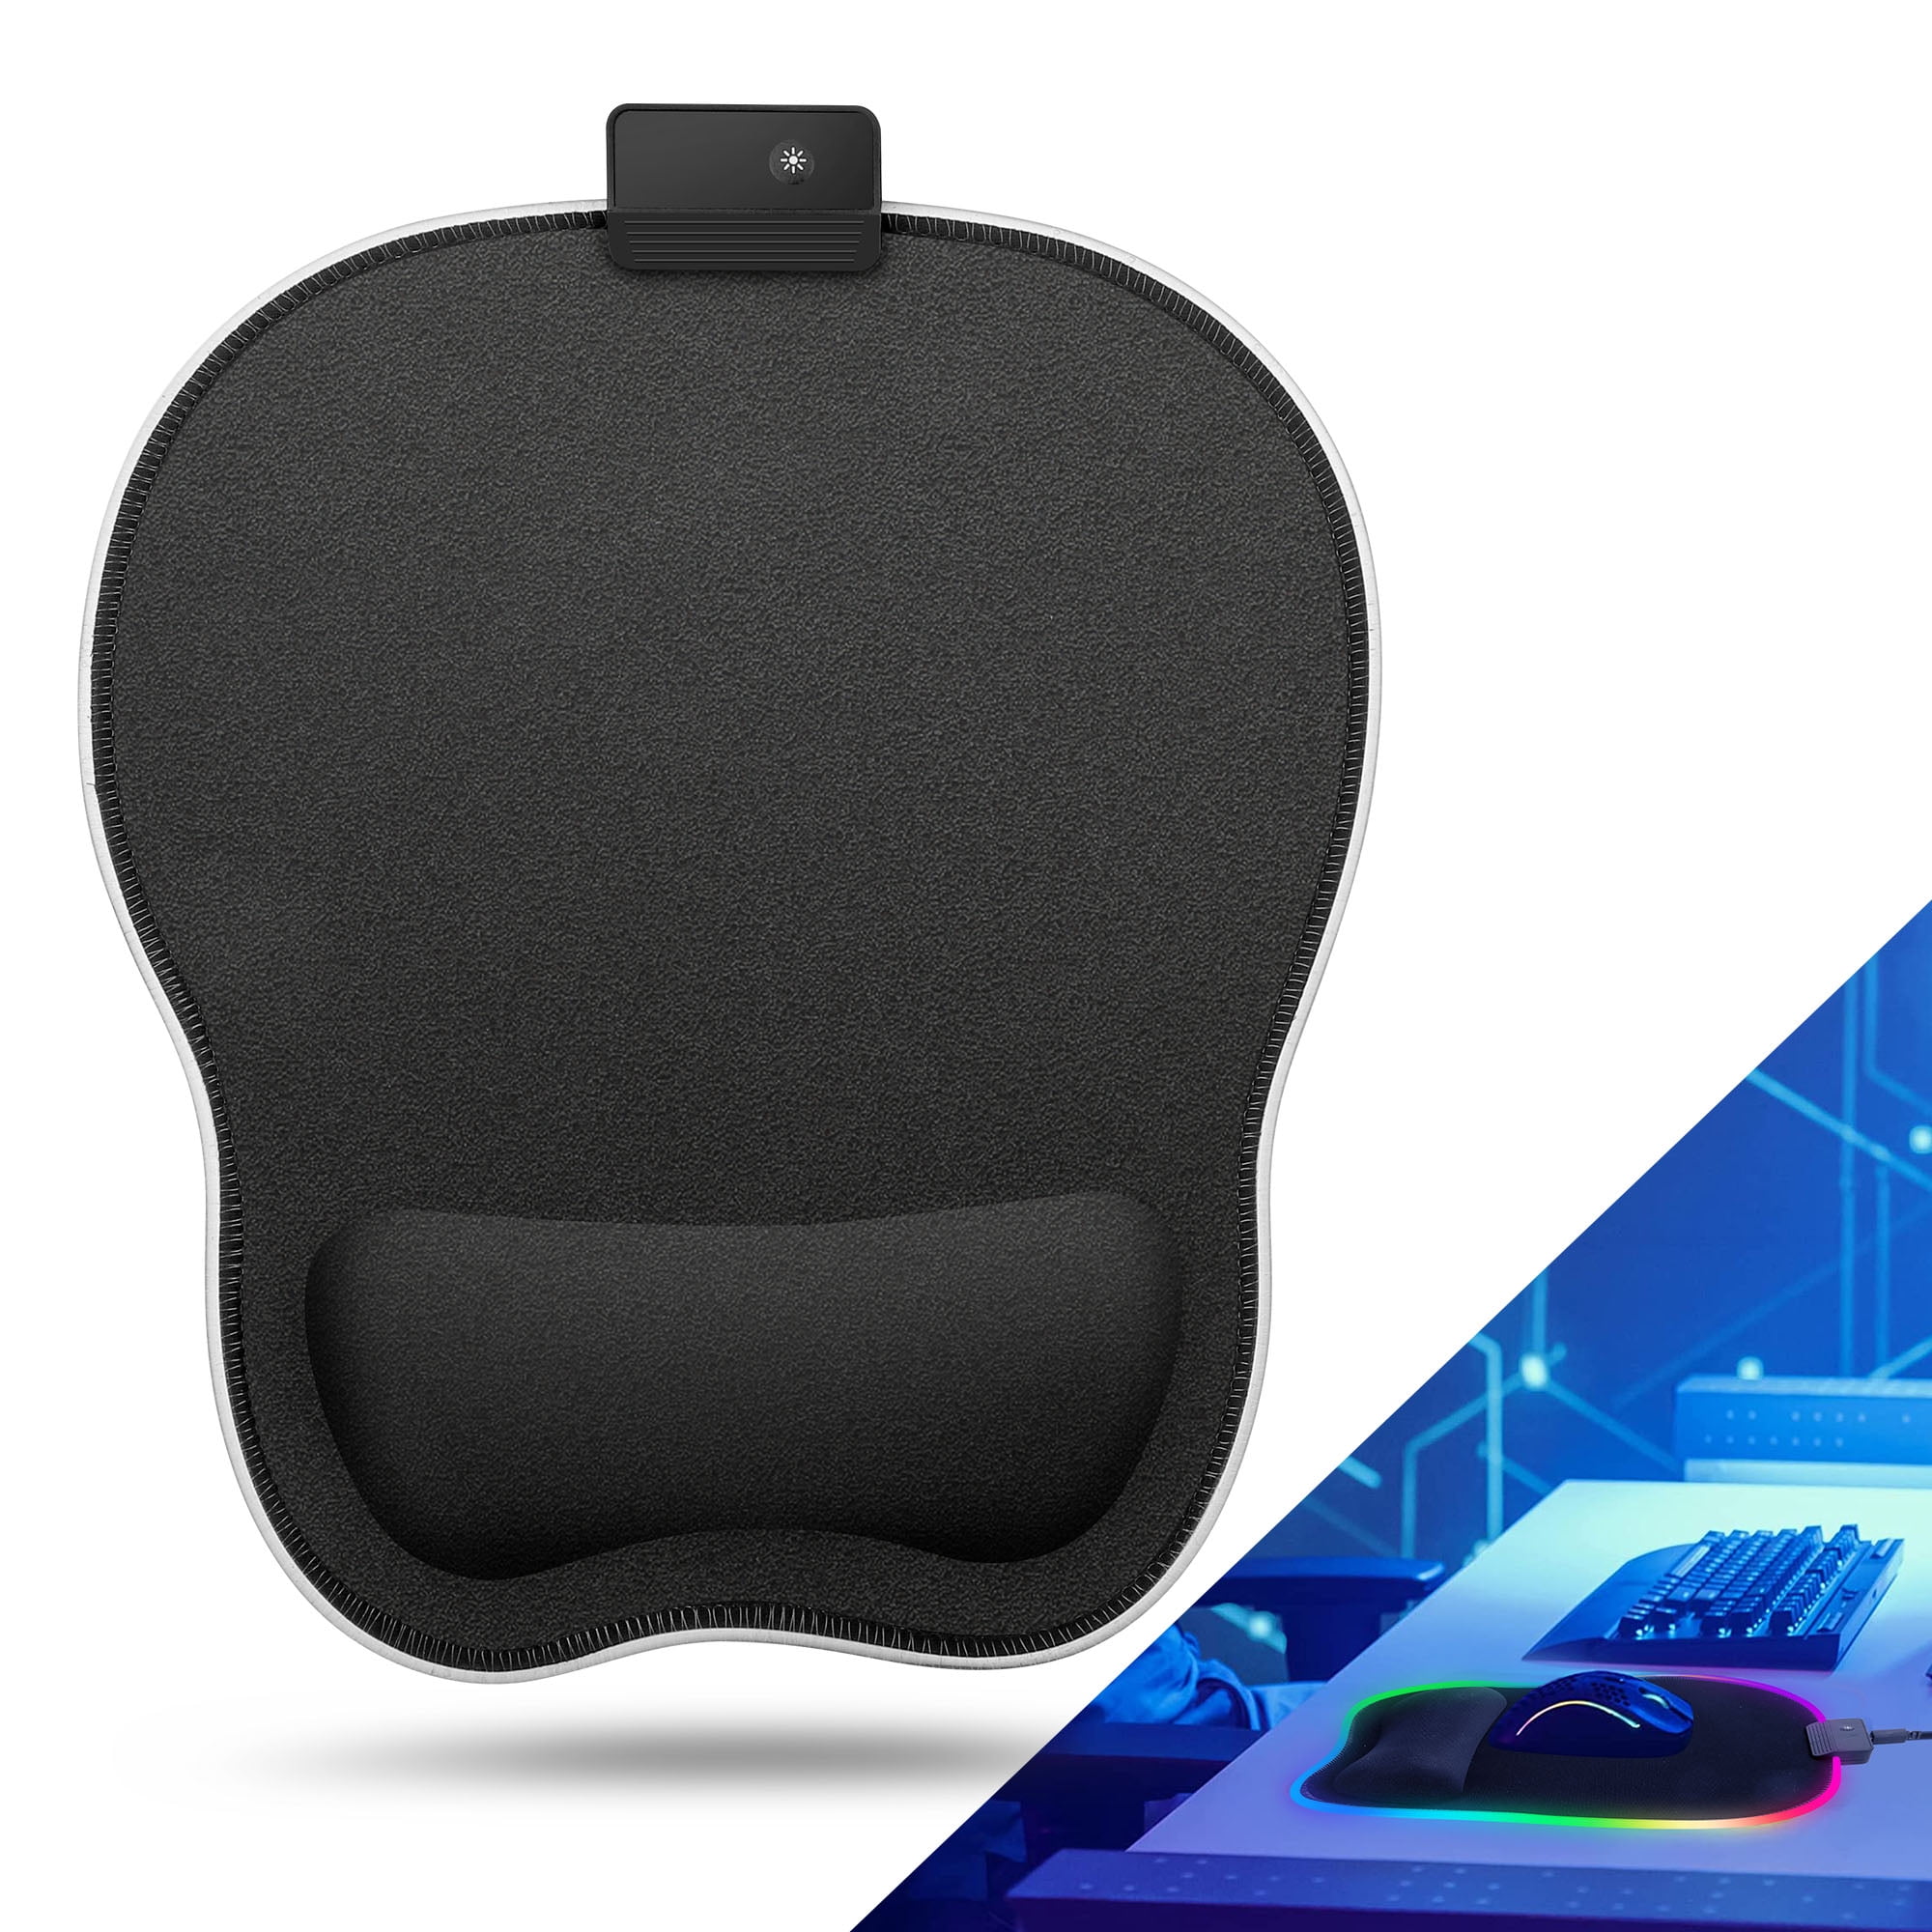 RGB Mouse Pad with Wrist Rest, Jelly Comb LED Gaming Mouse Pad with Memory  Foam Wrist Support, Pain Relief Mousepad with Non-Slip Rubber Base 